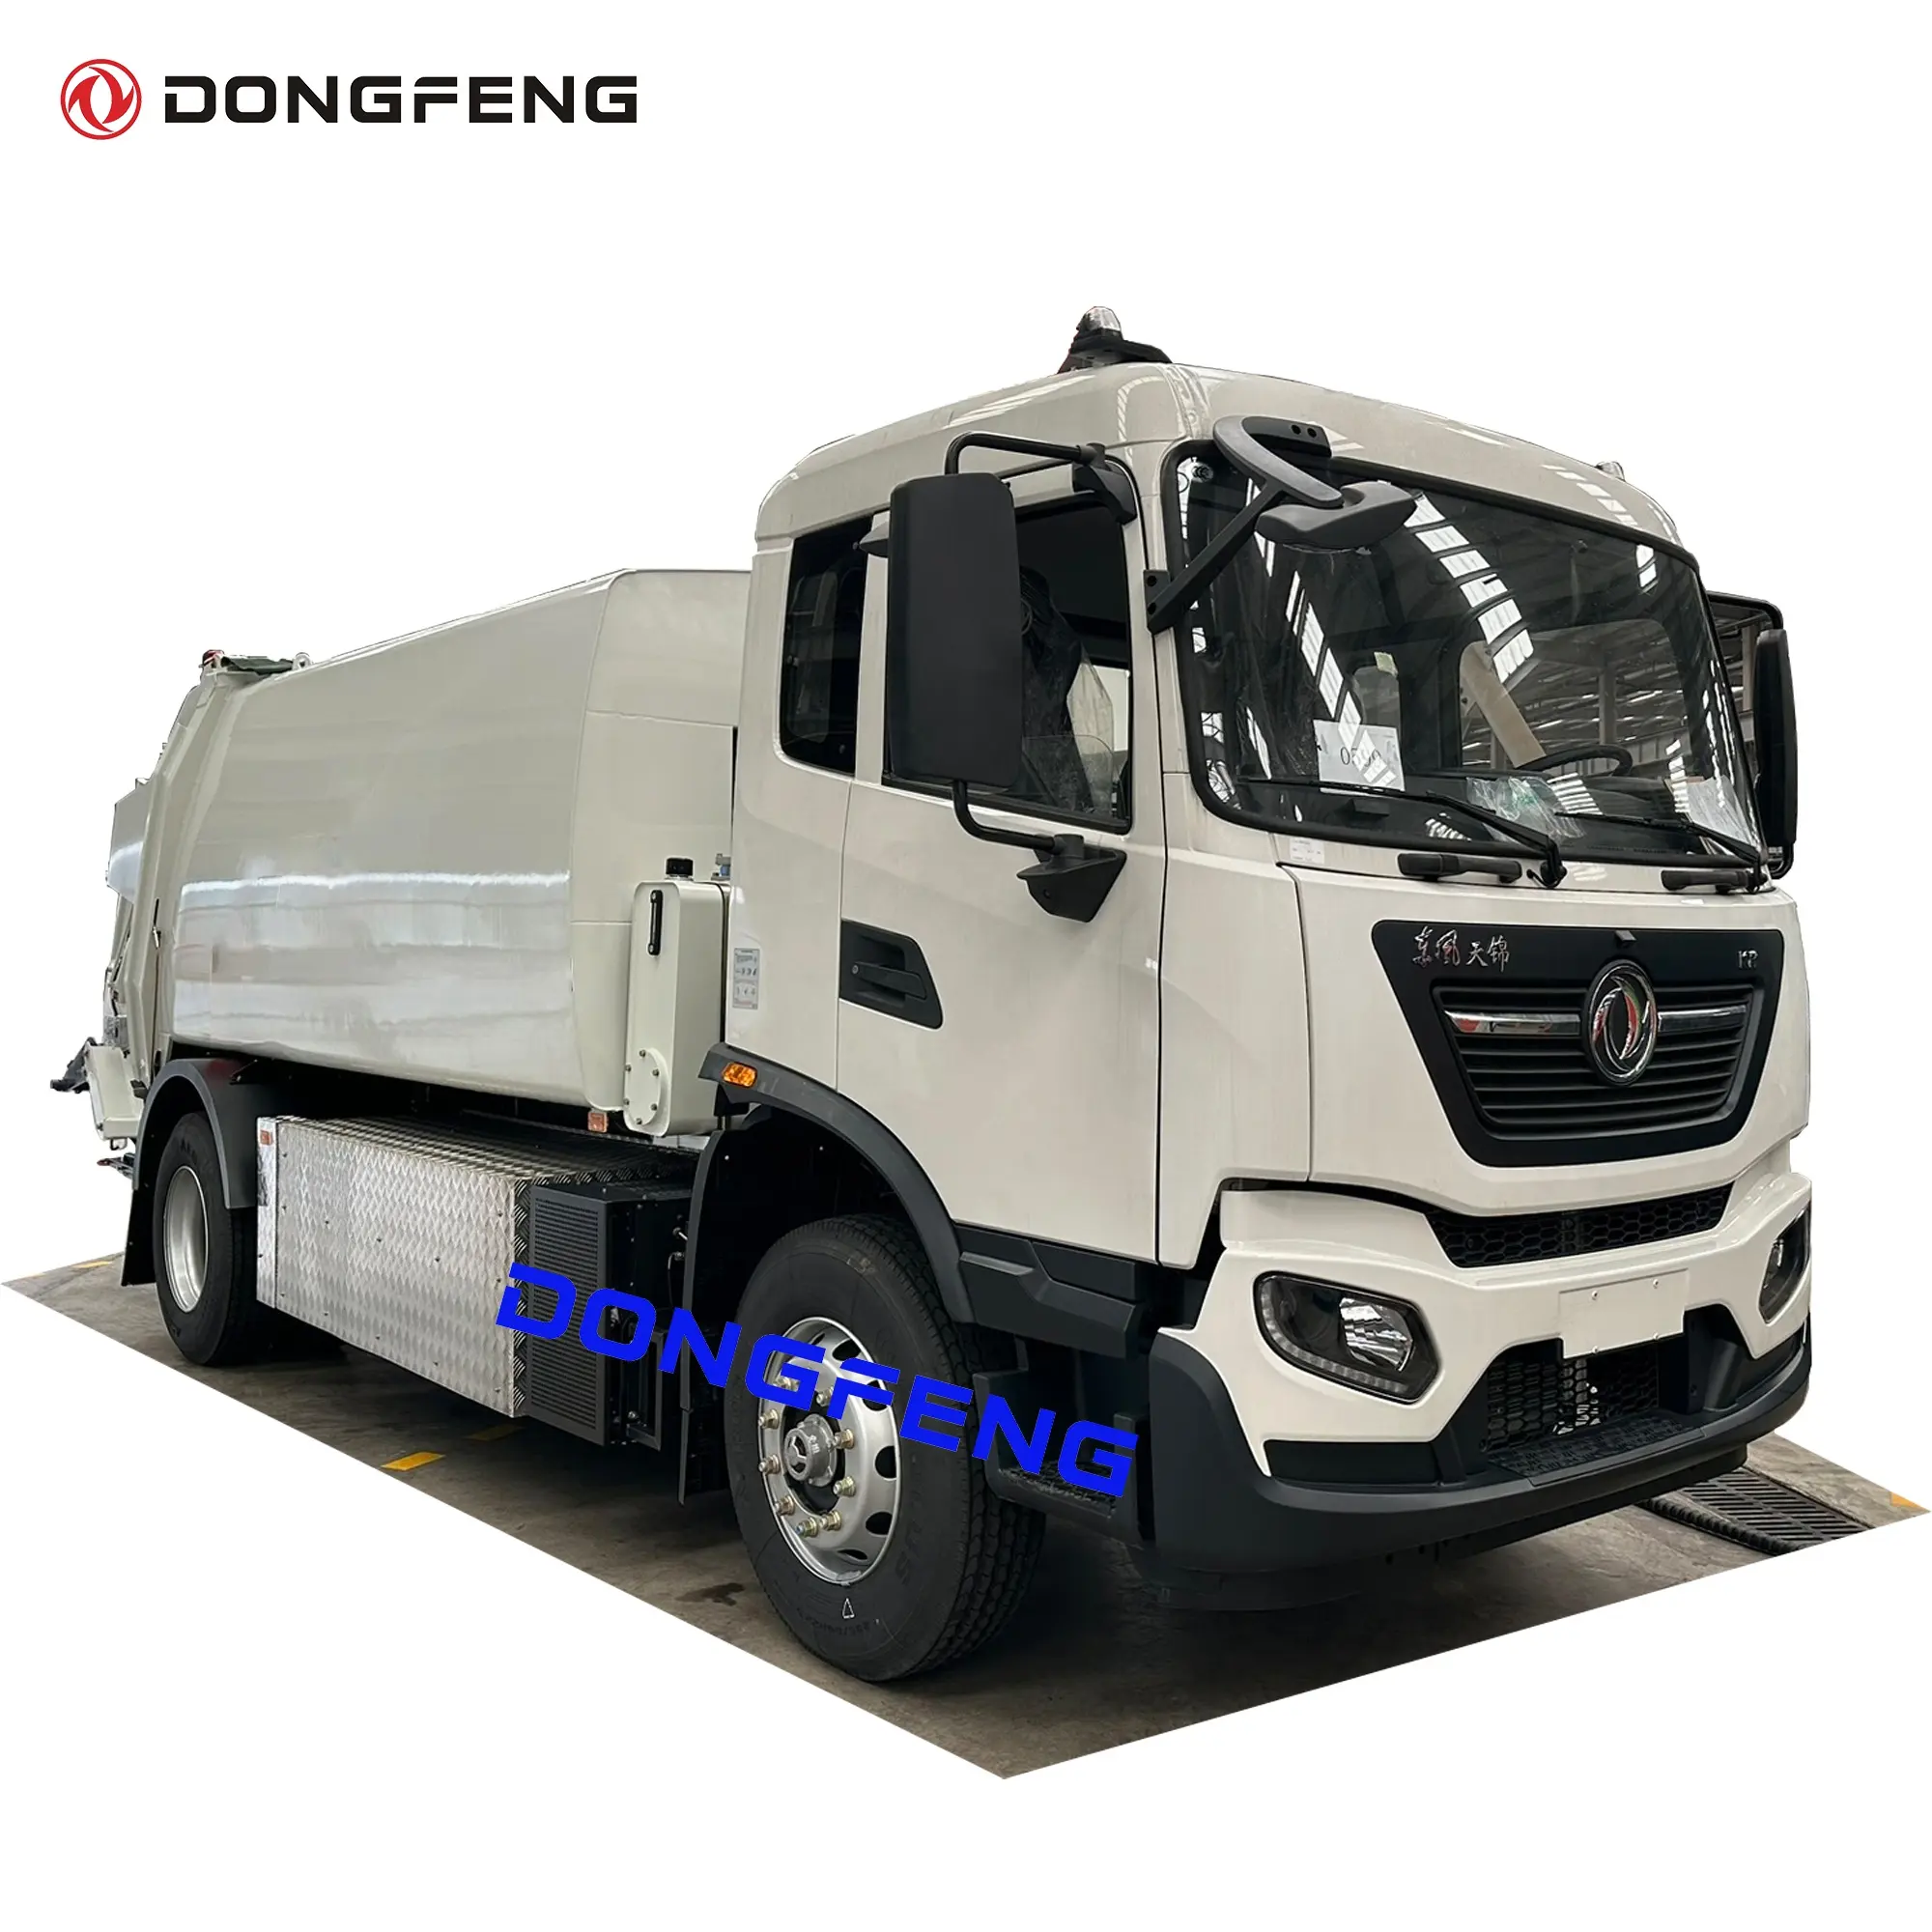 DONGFENG 4x2 LHD type 10~115 m3 electric power compactor garbage truck price